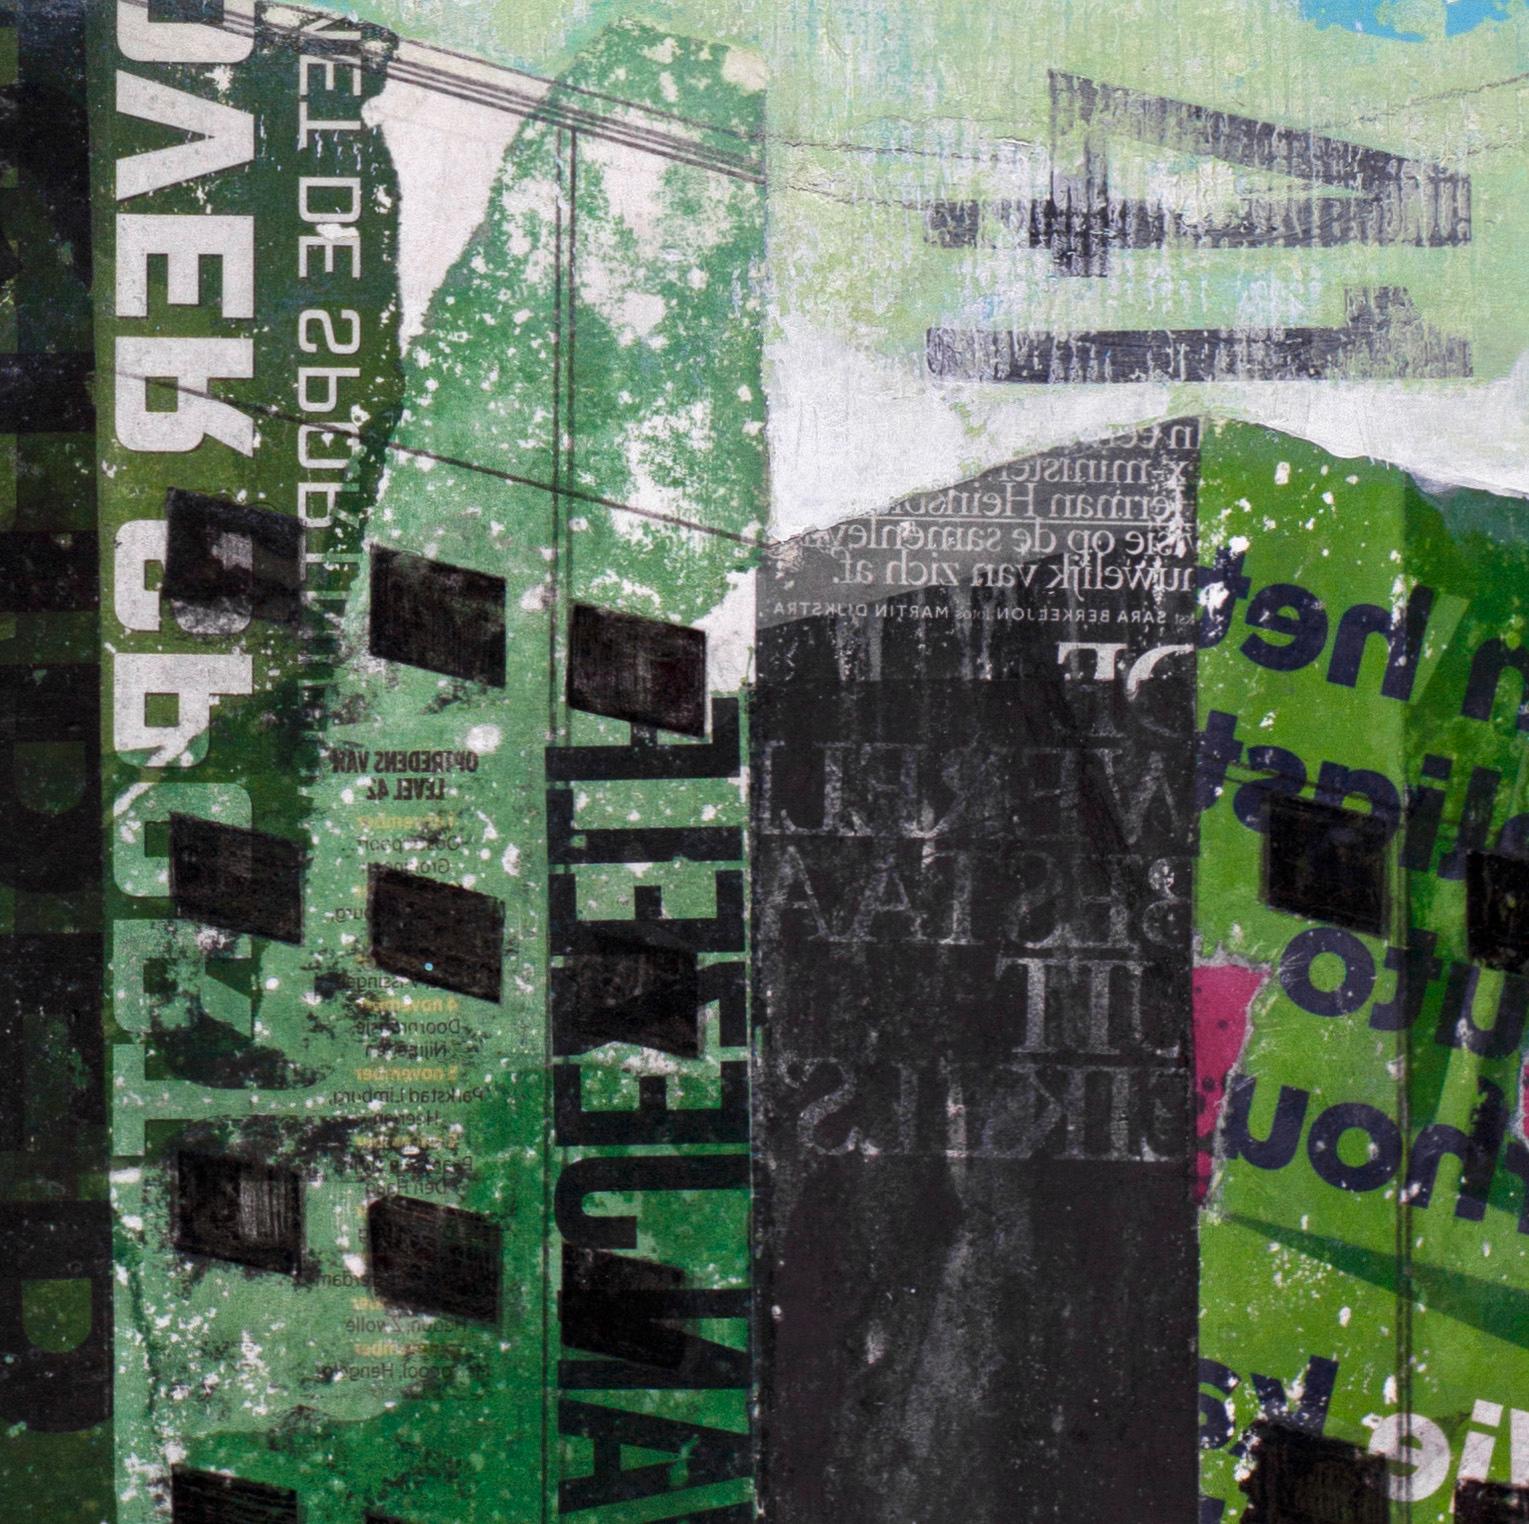 Tuesday Swing - street art urban landscape grey and green painting on paper - Painting by Deb Waterman